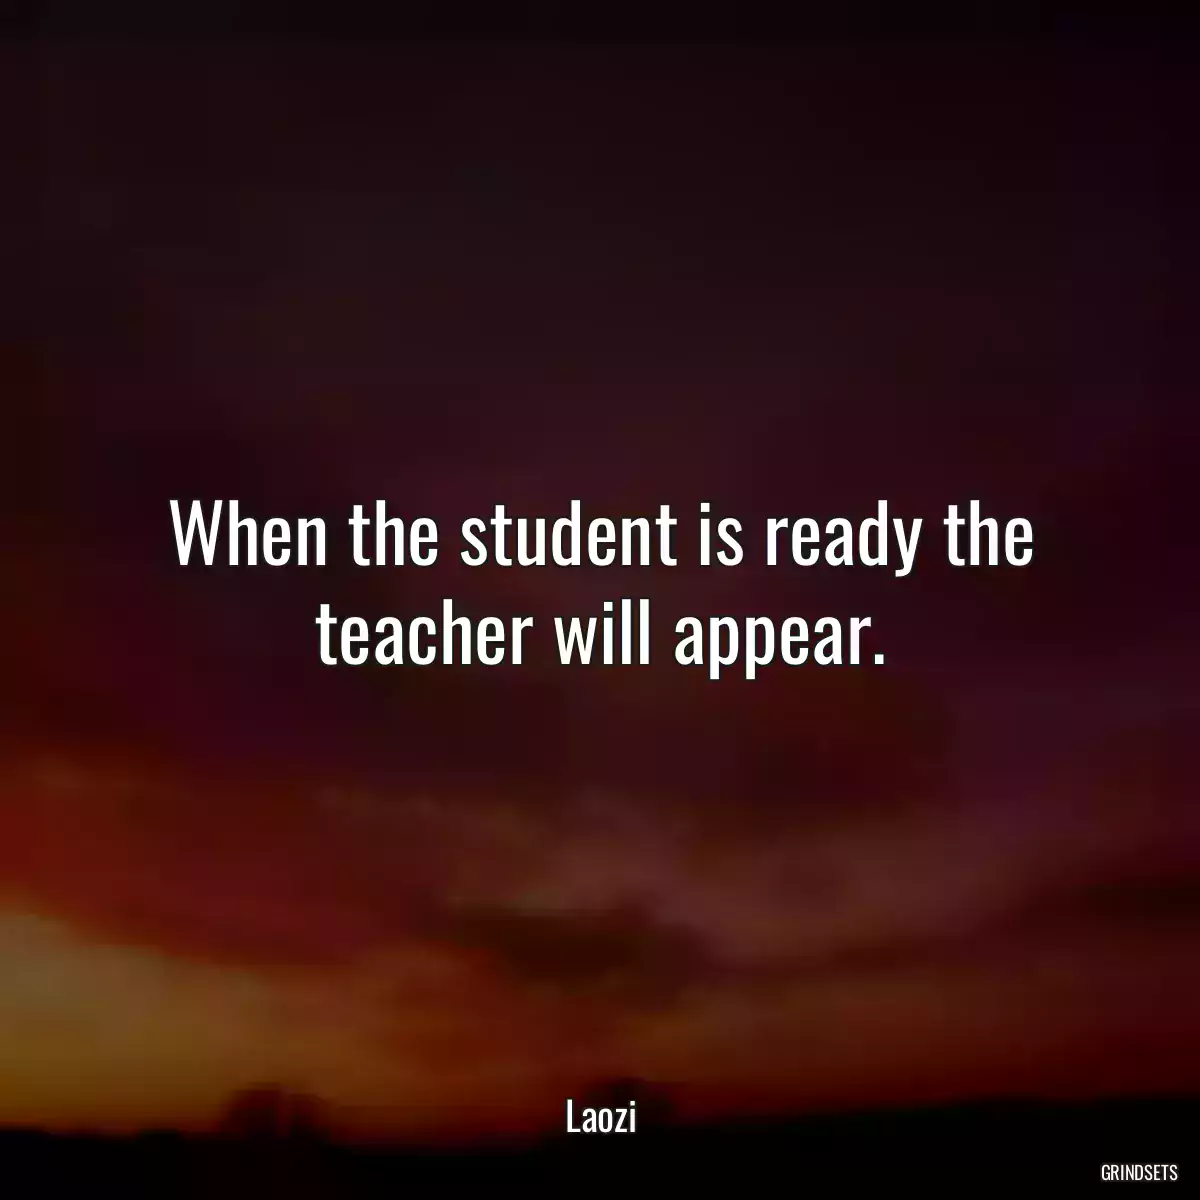 When the student is ready the teacher will appear.